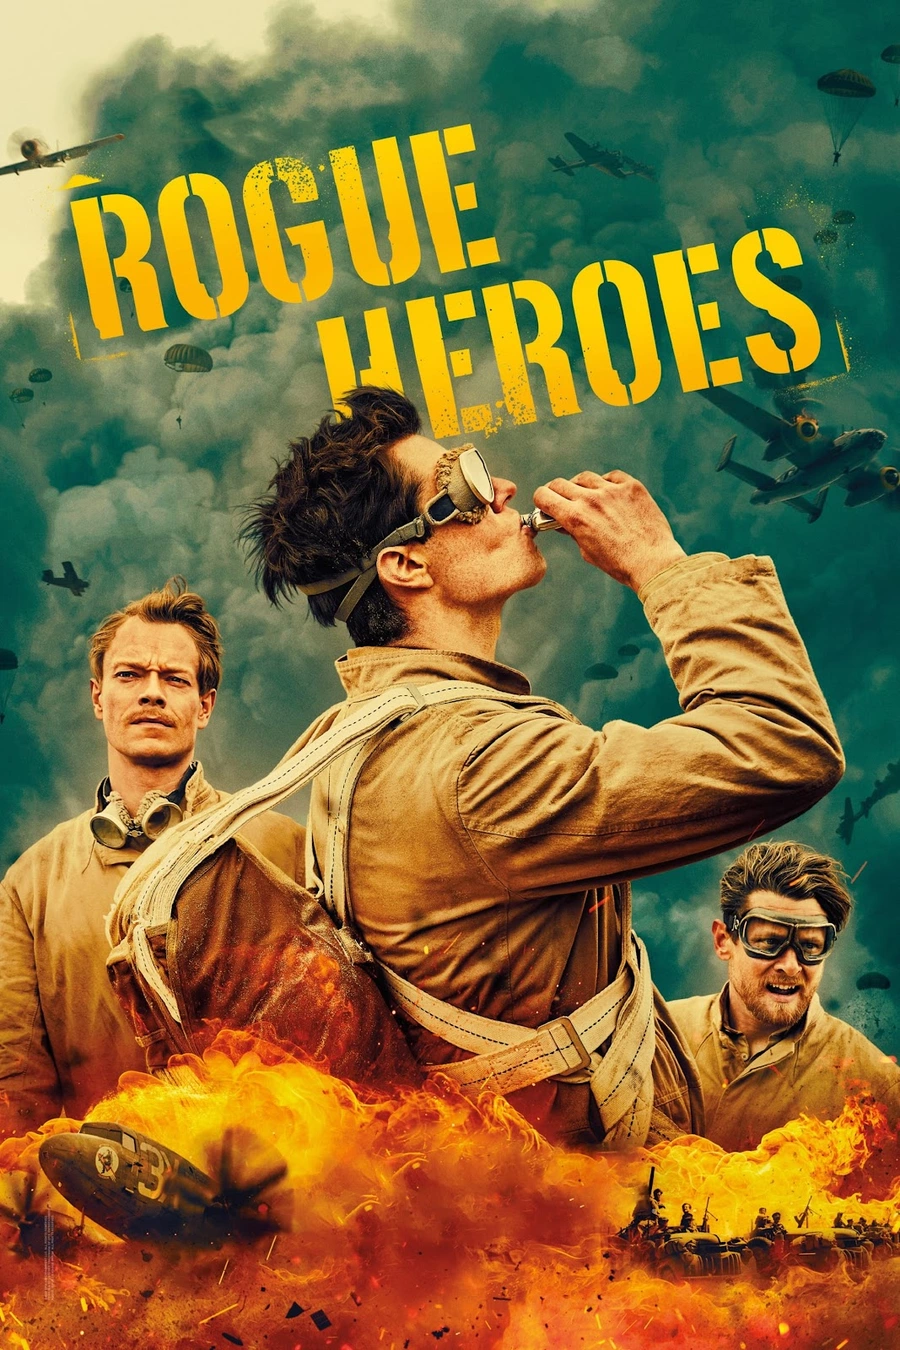 Poster for the 6-episode war drama «SAS: Rogue Heroes», a new project by Stephen Knight («Peaky Blinders»), which premiered on October 30 on BBC One (and today it will be released on the American channel "Epix").. Cairo, 1941. Eccentric young officer David Stirling, hospitalized after a training accident, is deathly bored. Convinced that traditional military units need an alternative, he comes up with a radical plan that goes against all the rules of warfare of the time. The man begins his fight for the right to recruit the toughest, bravest and smartest soldiers to a small underground unit that will wreak havoc in the enemy's ranks. More rebels than soldiers, the members of Stirling's team are as flawed, imperfect and reckless as they are brave and heroic.

Starring:  Connor Swindells, Jack O'Connell, Alfie Allen, Sofia Boutella, Dominic West and others.